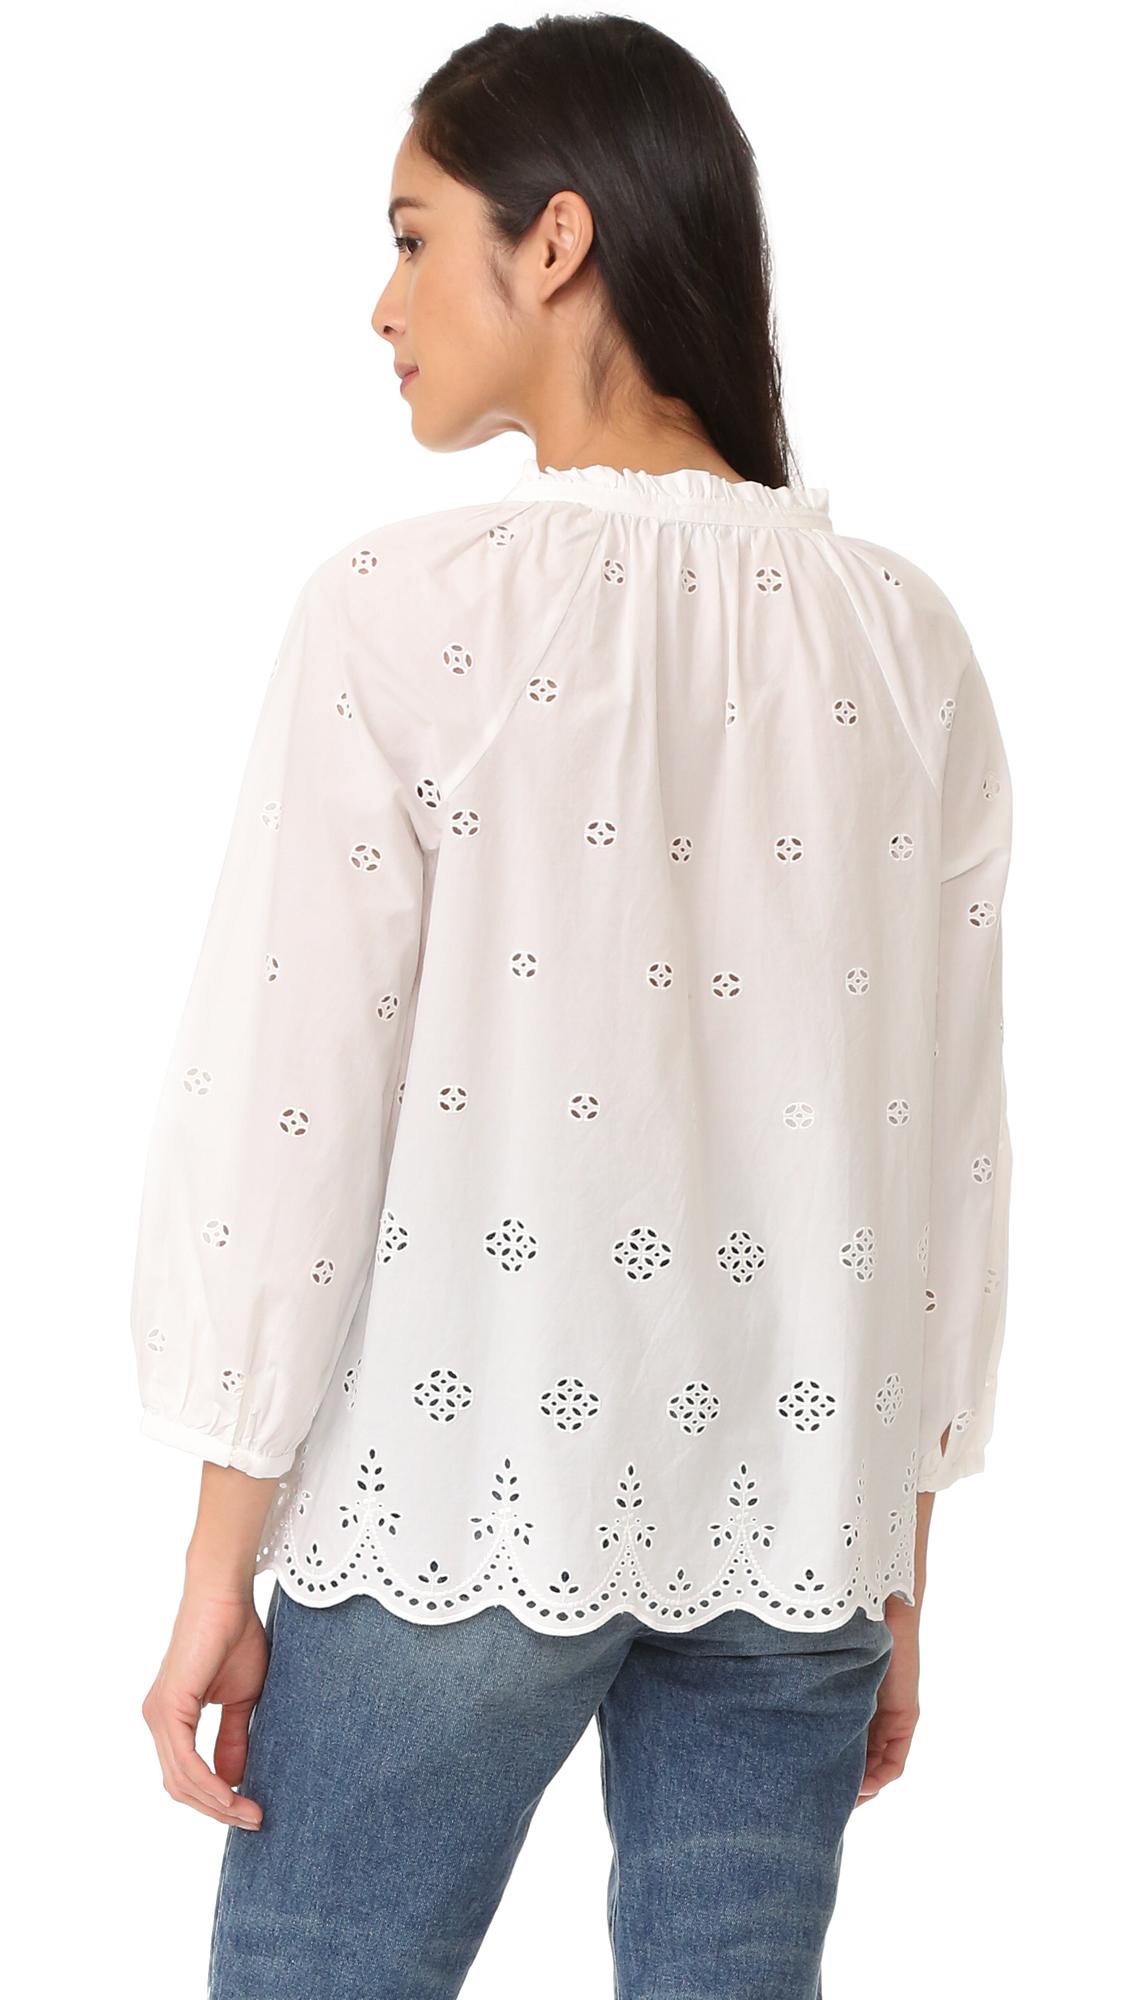 Lyst - Madewell Eyelet Blouse With Scallop Hem in White